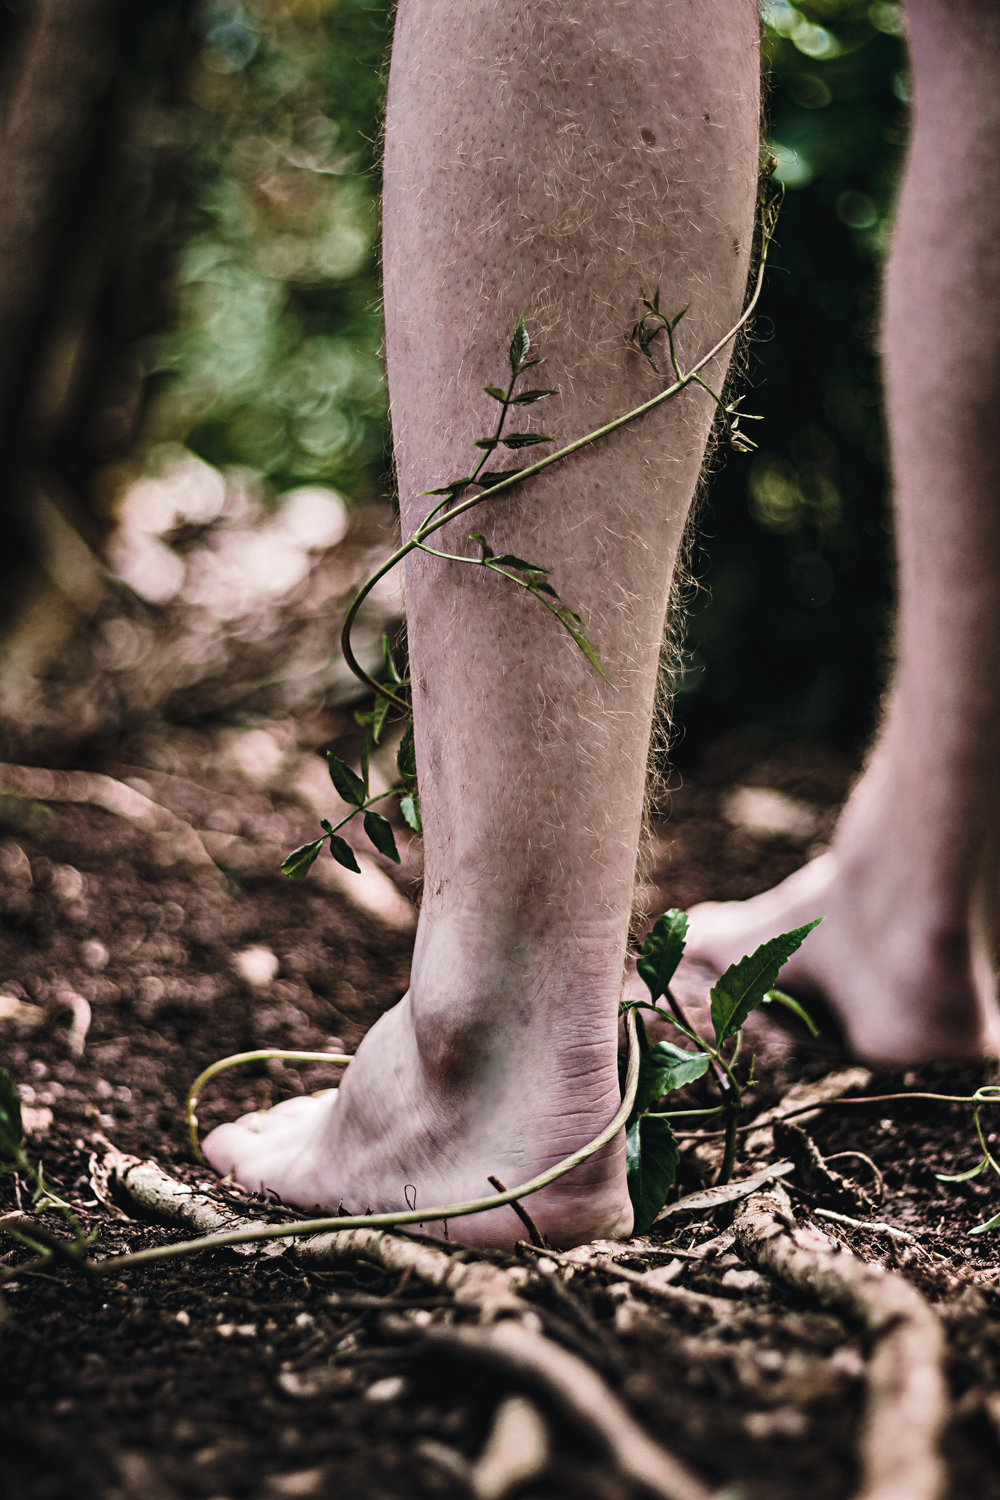 Colour photograph of a leg standing on forest ground with vine wrapped around it.